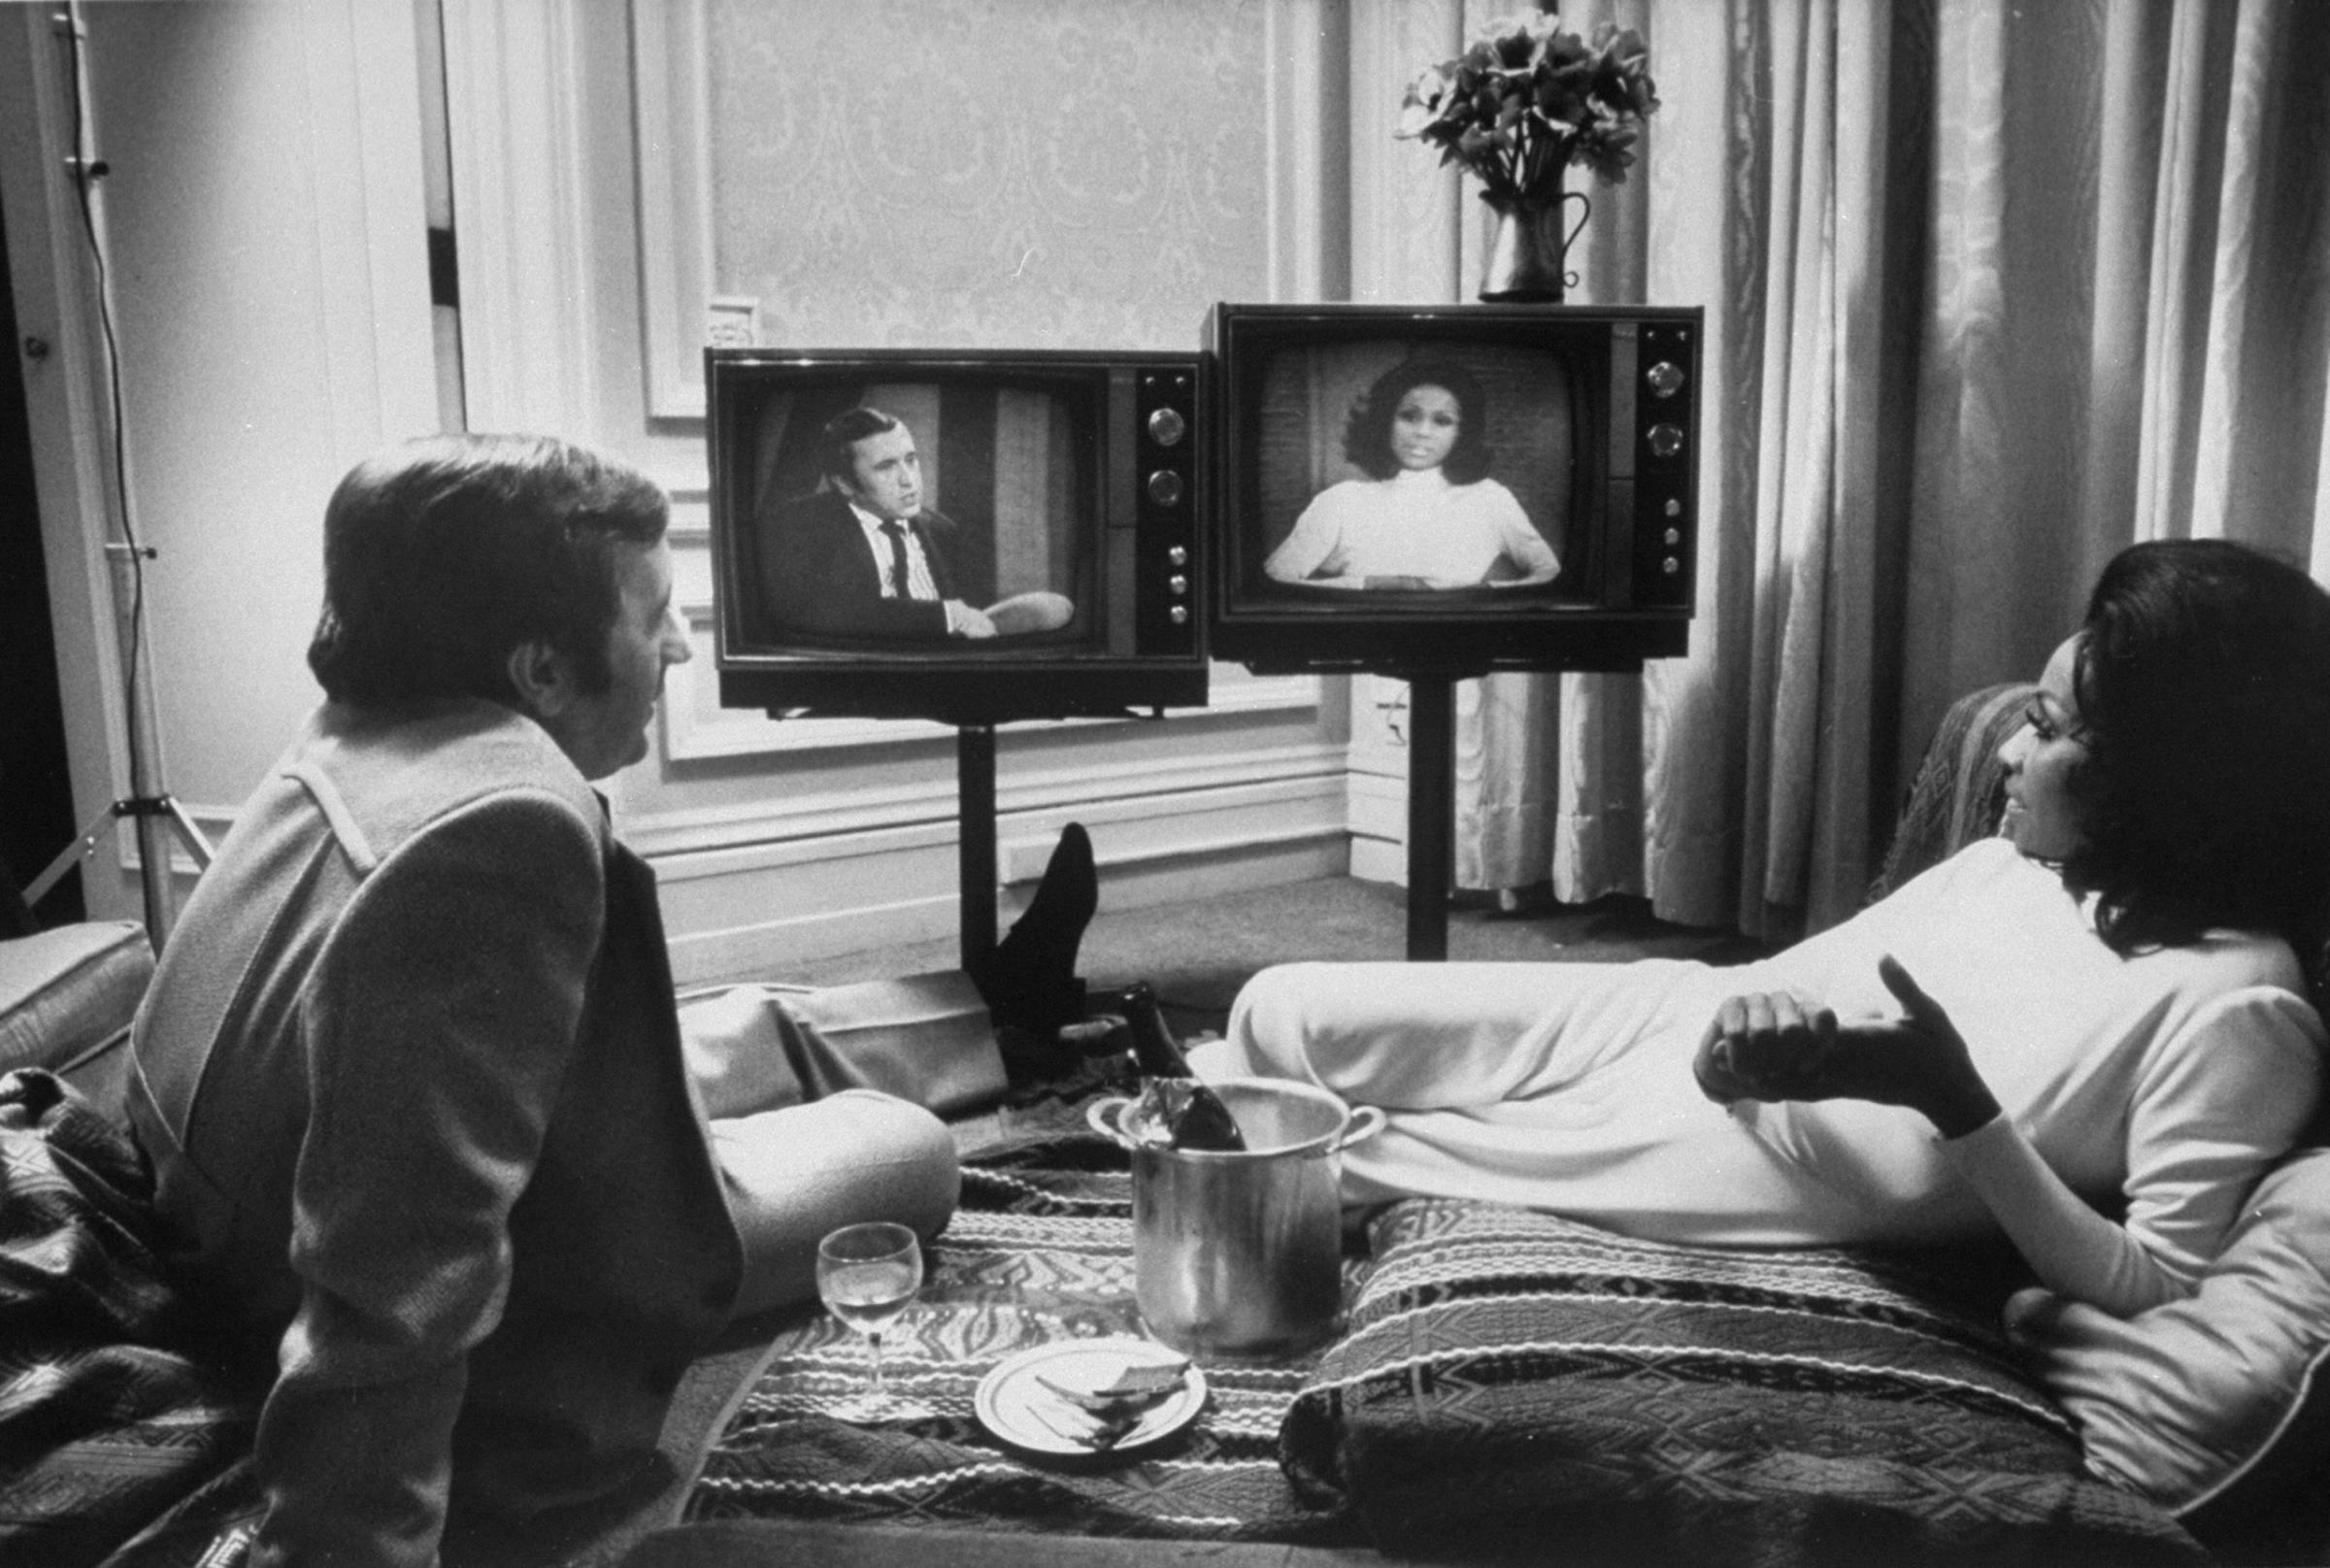 Actress Diahann Carroll and journalist David Frost watch themselves on separate talk shows. Carroll and Frost were engaged for a while, but never married.